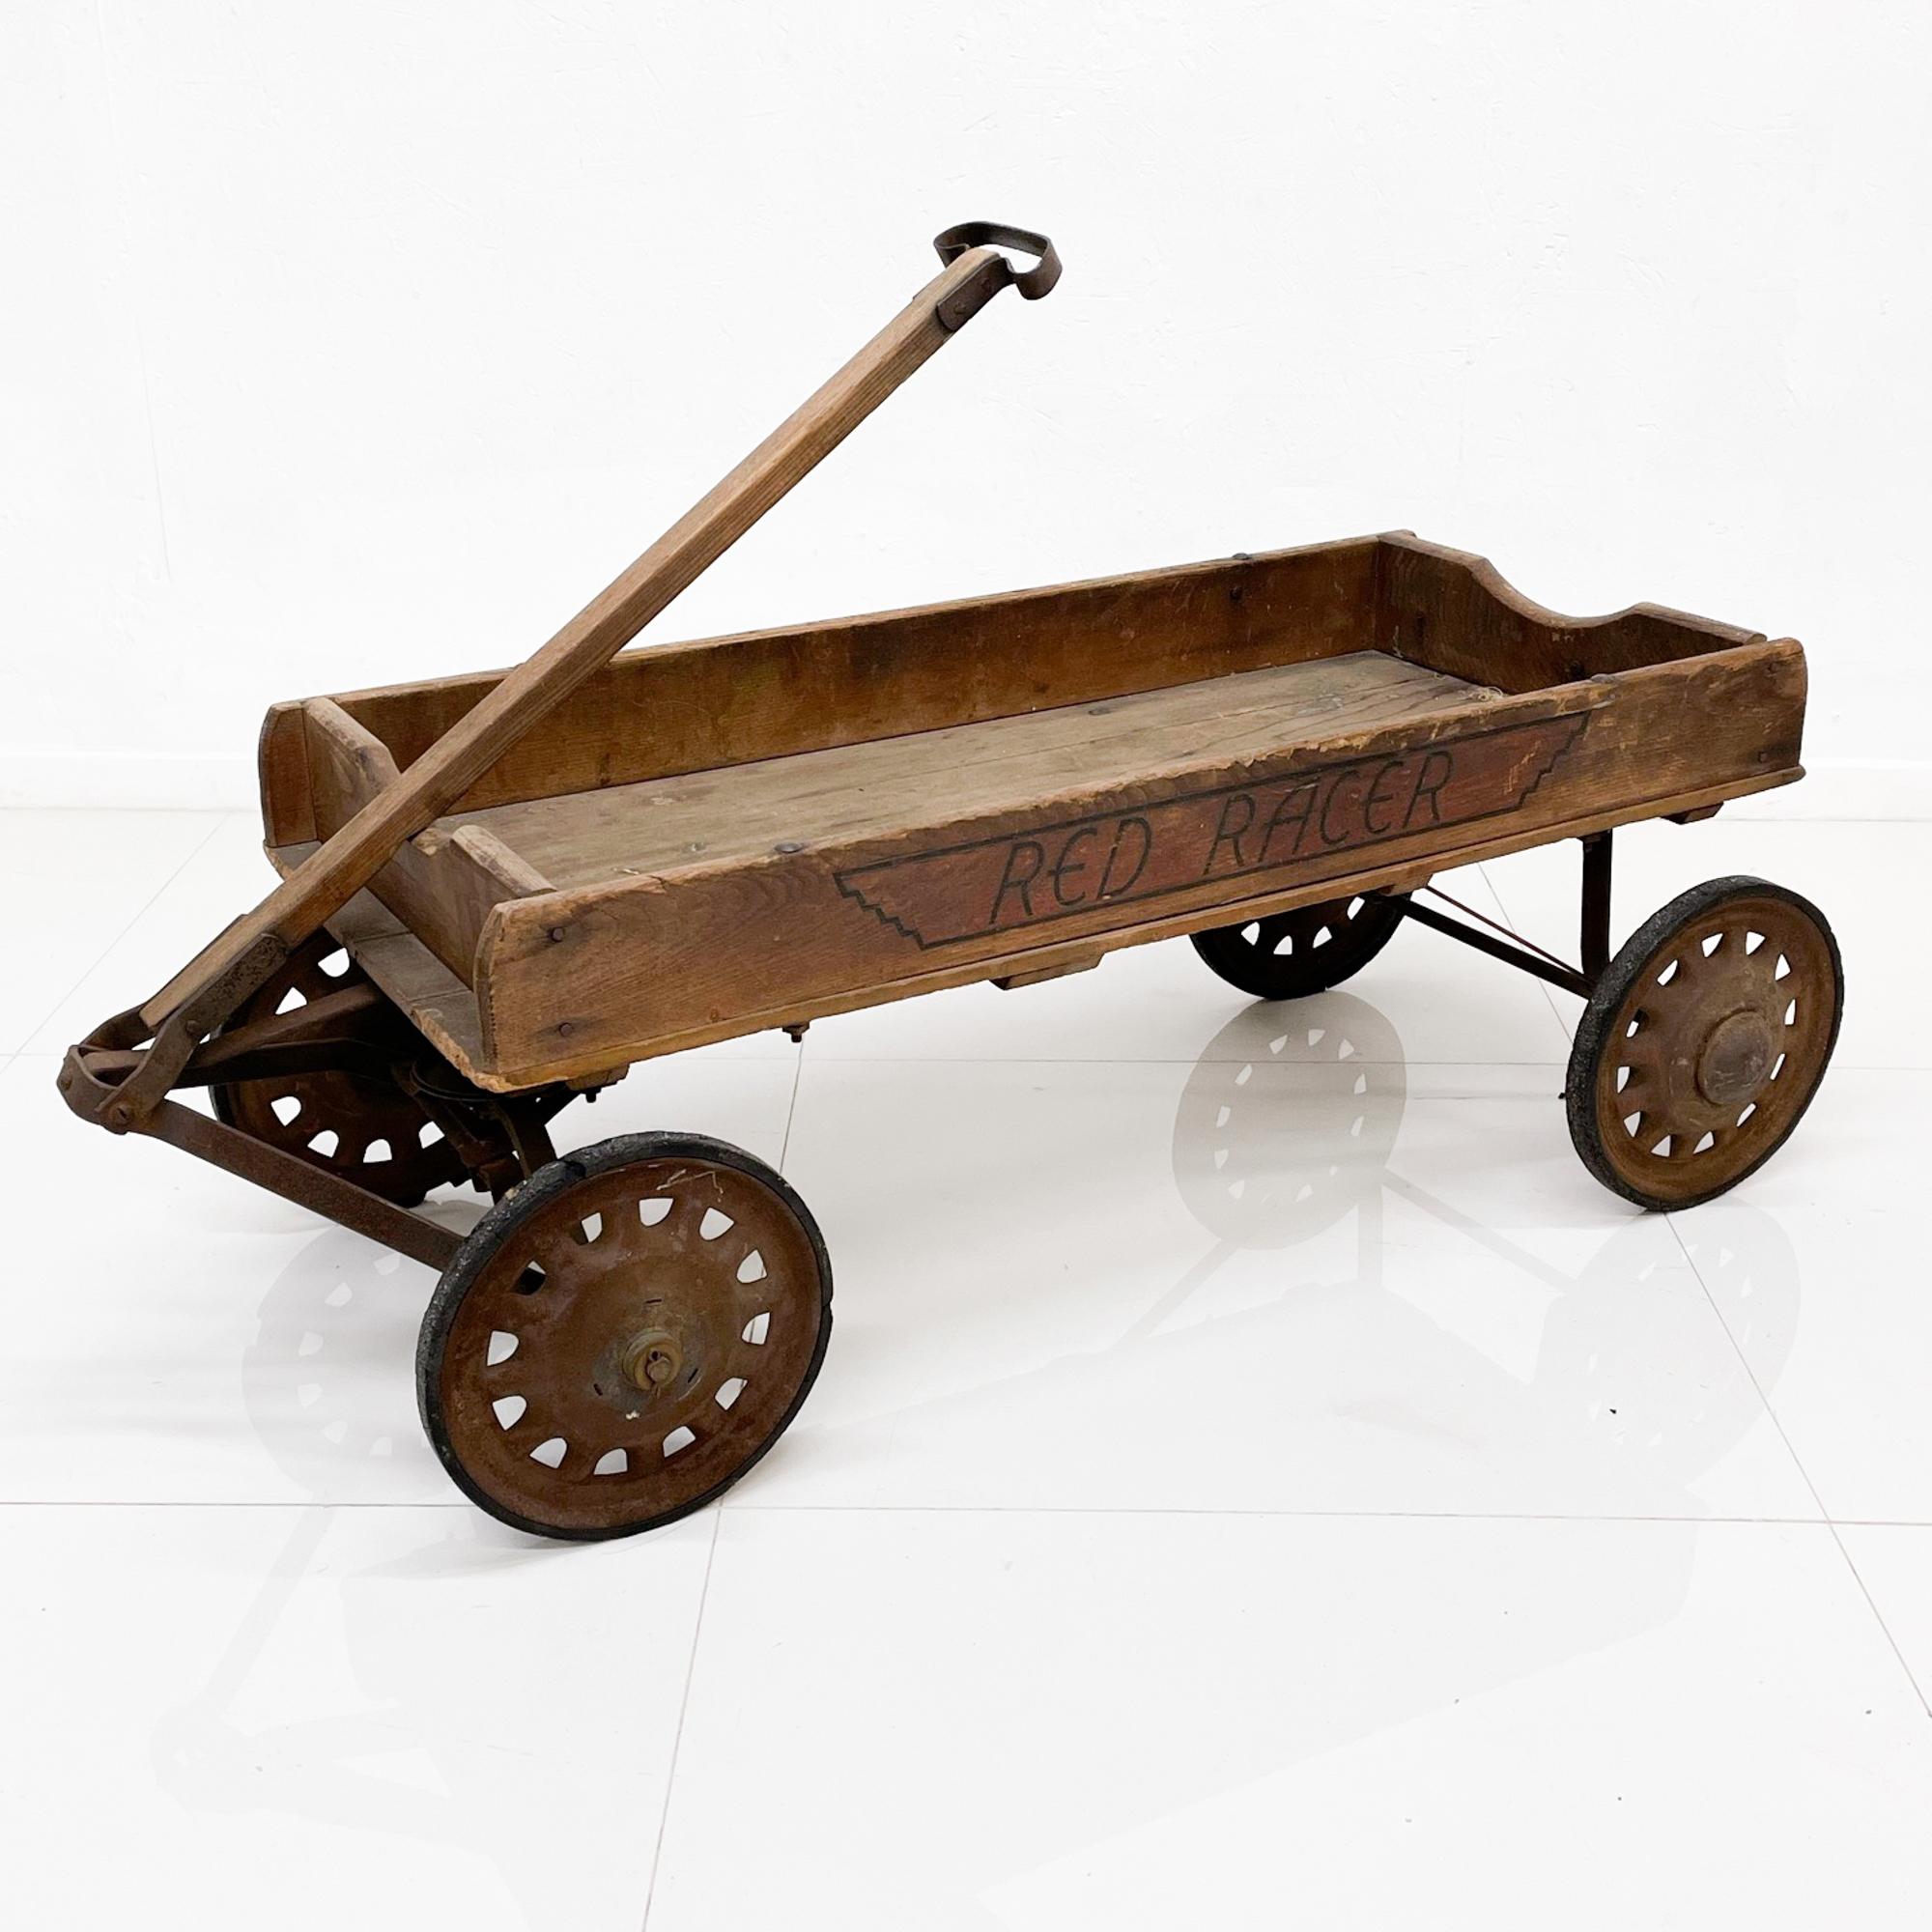 American Craftsman Antique Wooden Wagon Red Racer American 1930s Original Condition